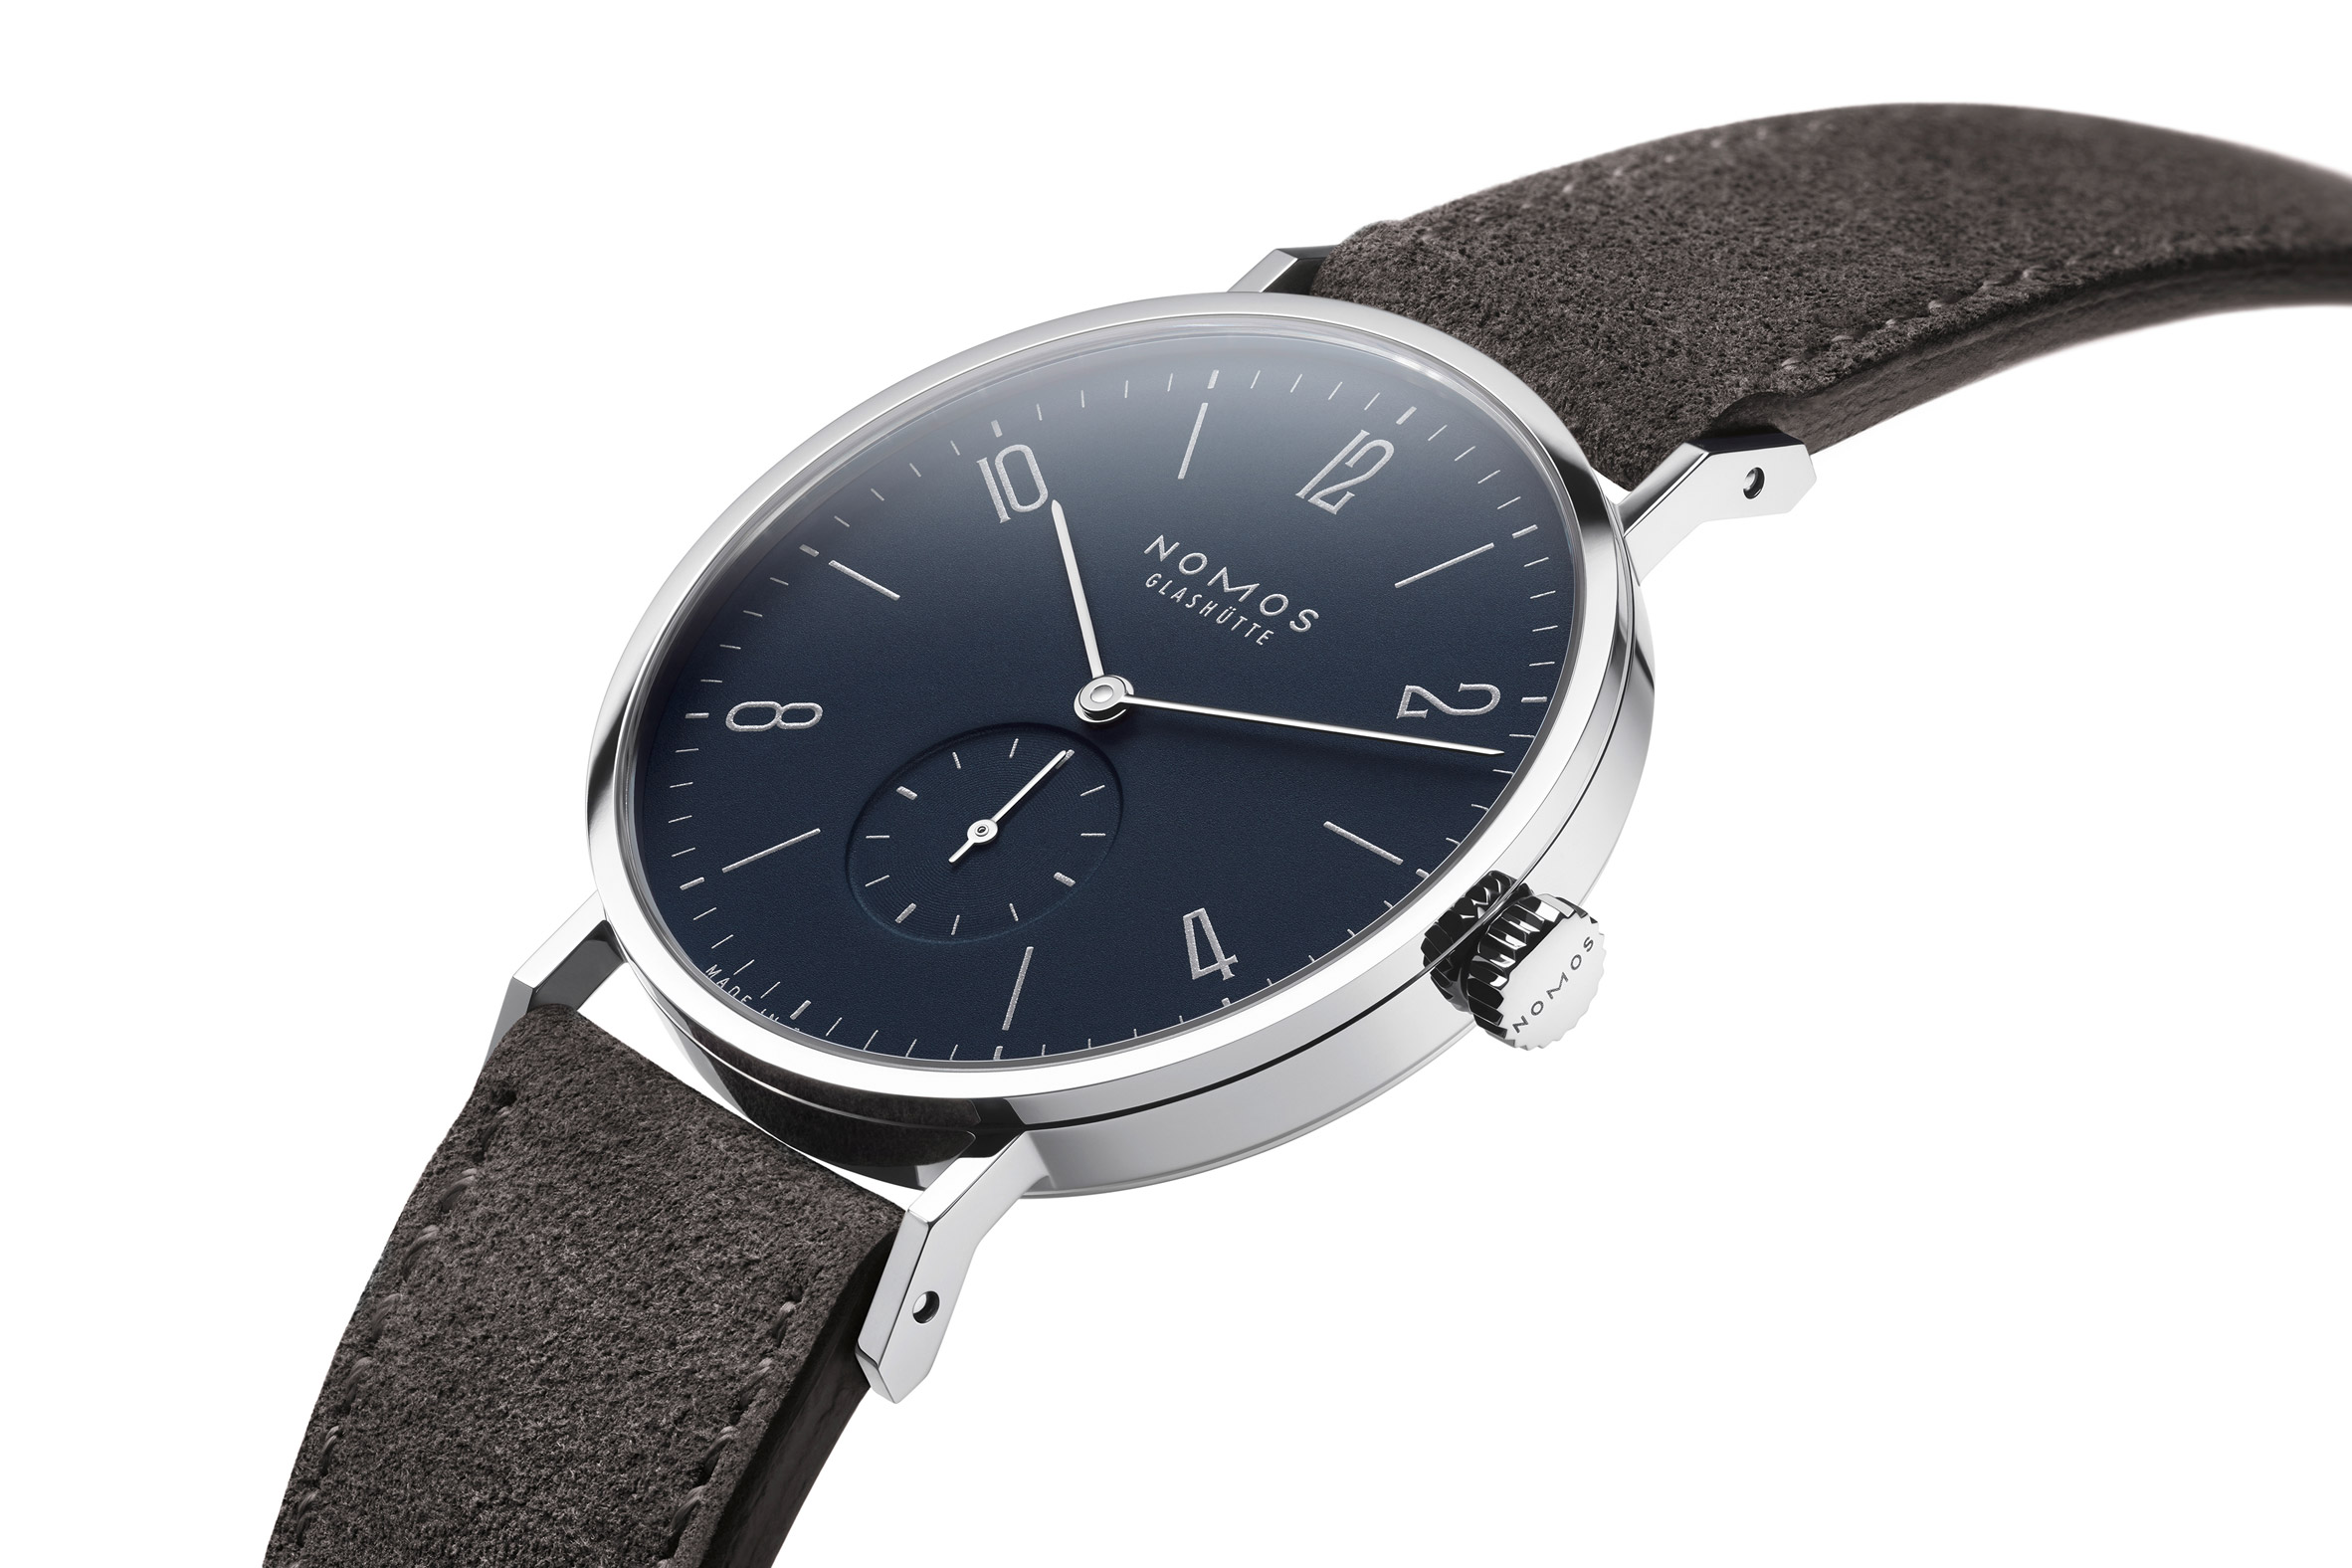 Nomos Glashütte releases two new Bauhaus-inspired watches